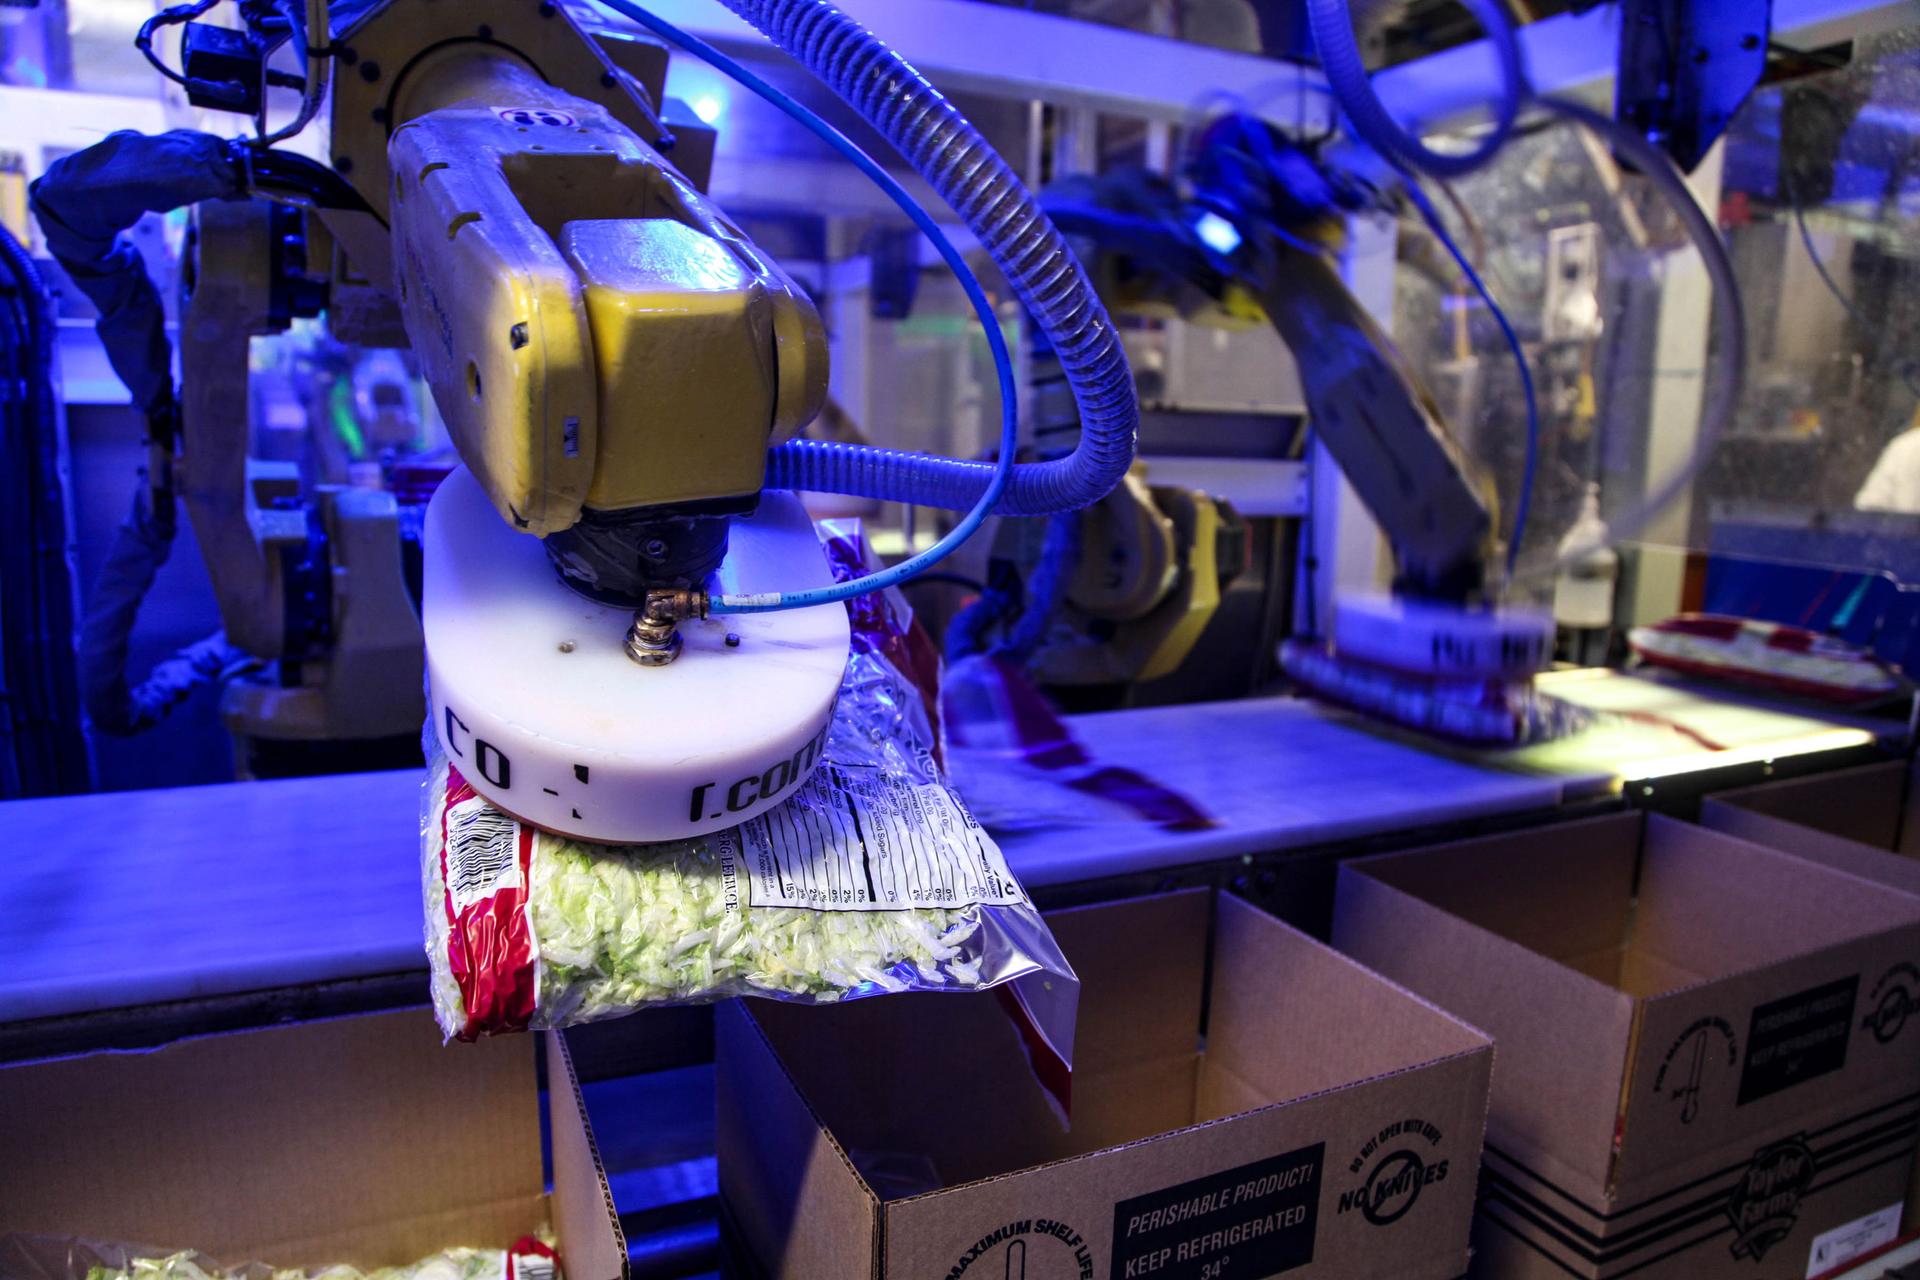 A robot uses suction to pick up a 5-lb back of lettuce and place it in a box. This task used to be done by workers.